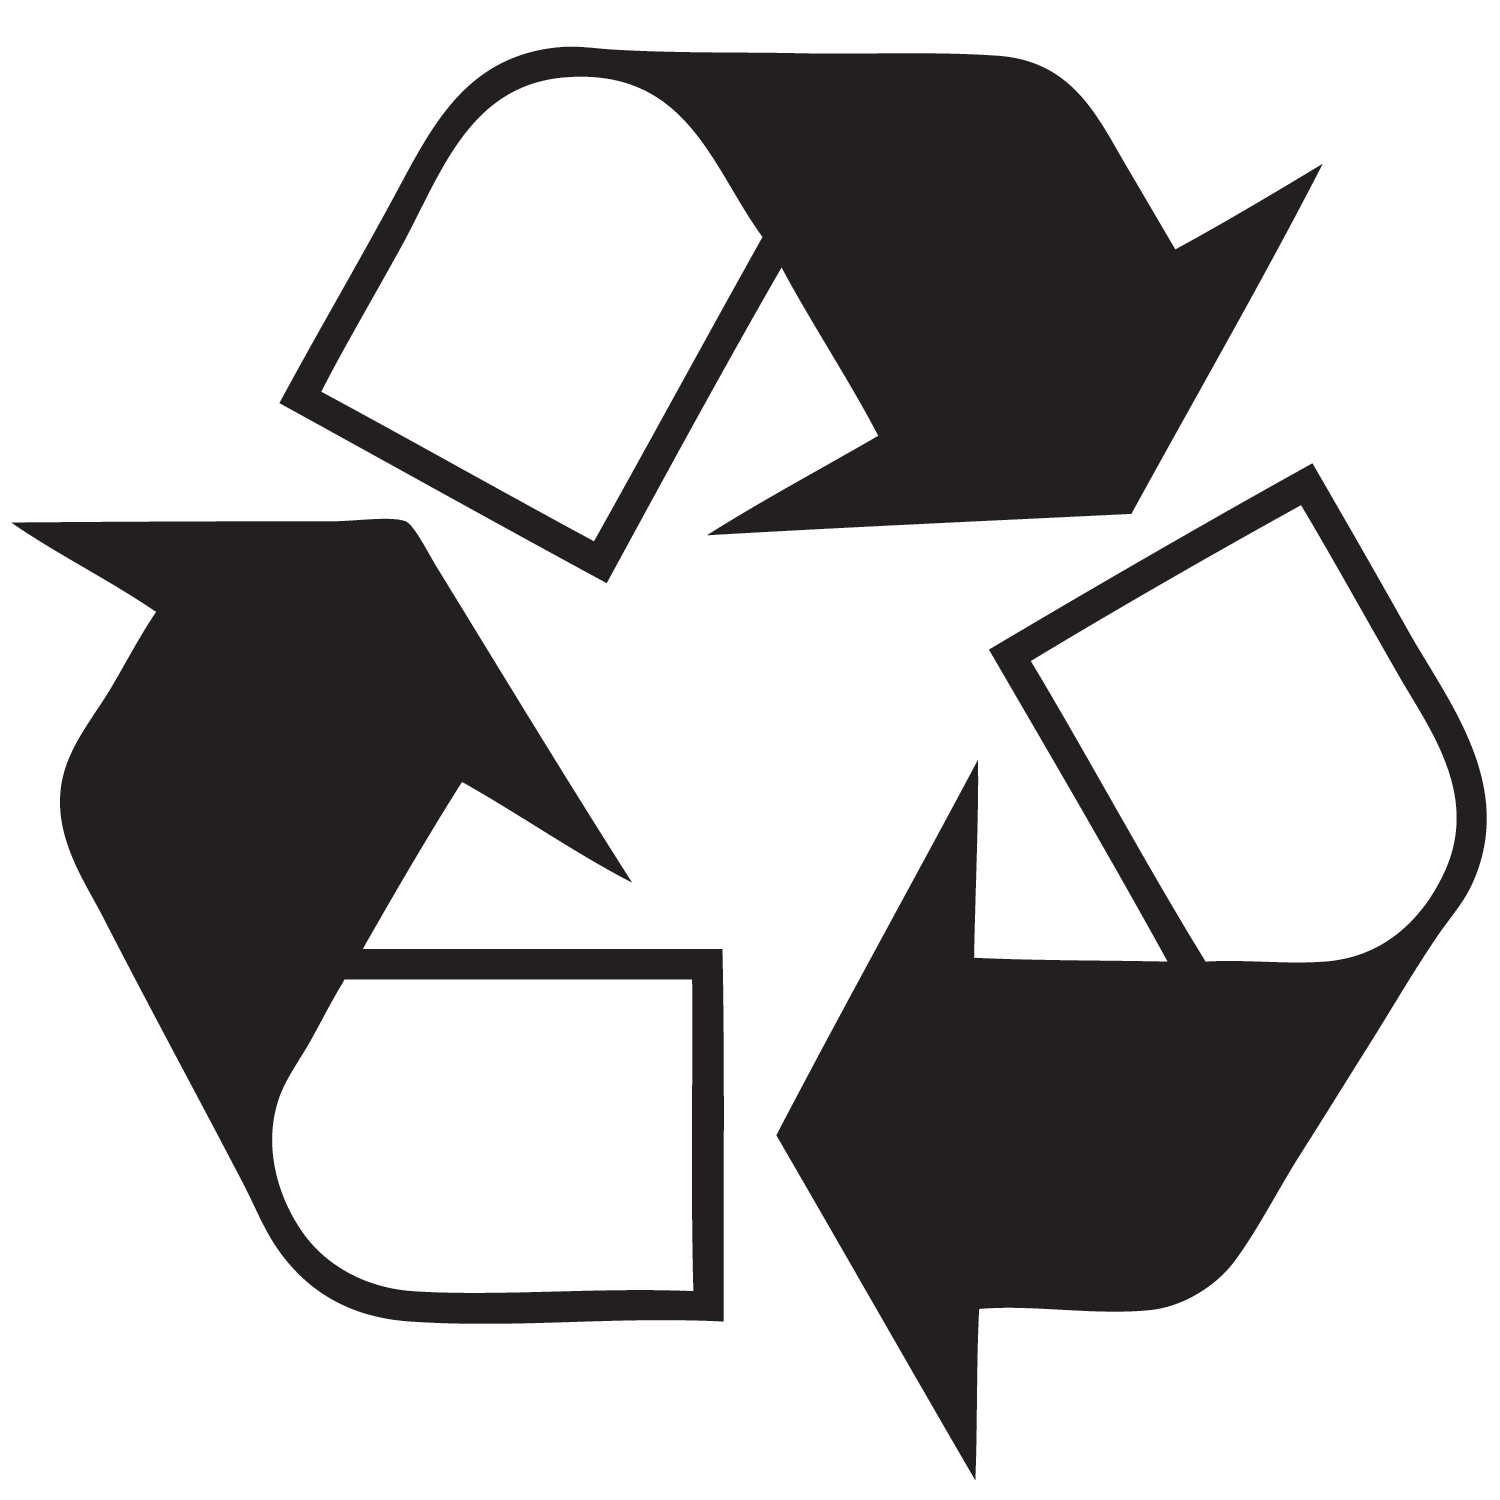 Large Recycle Logo - Free Recycling Symbols Printable, Download Free Clip Art, Free Clip ...